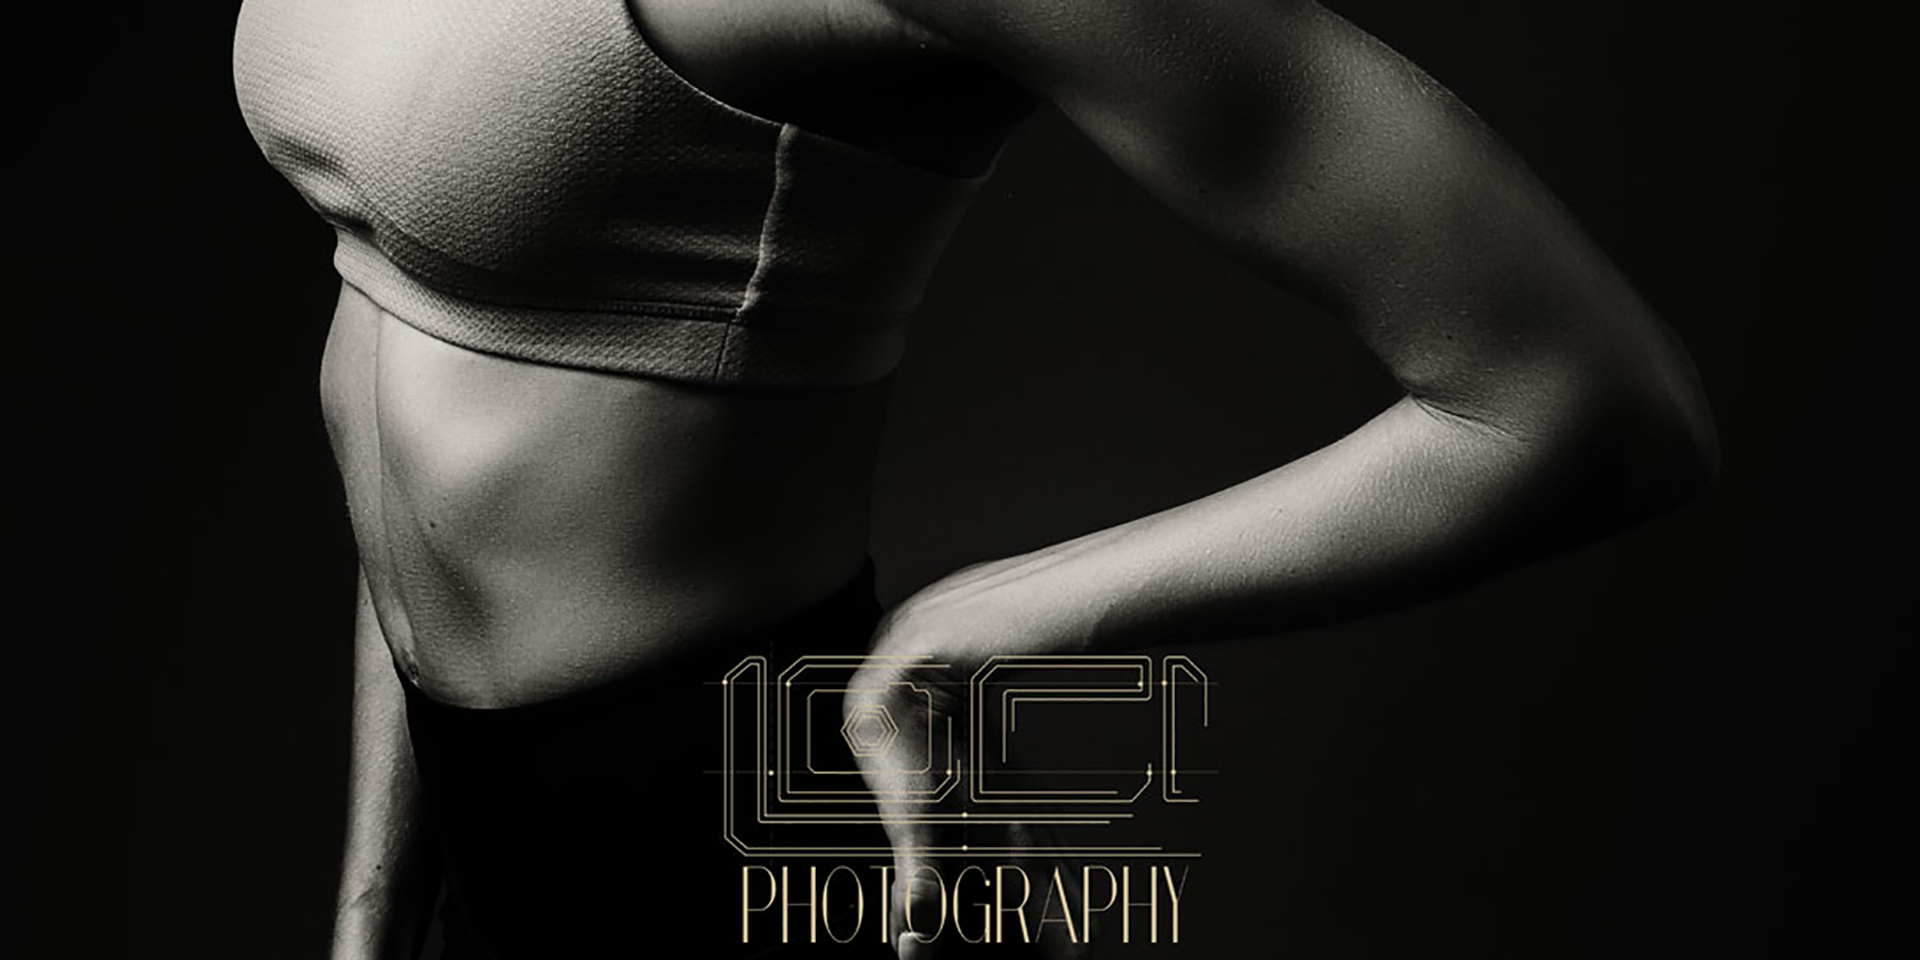 Blog header image of incredible fitness photography done by Loci Photography in studio